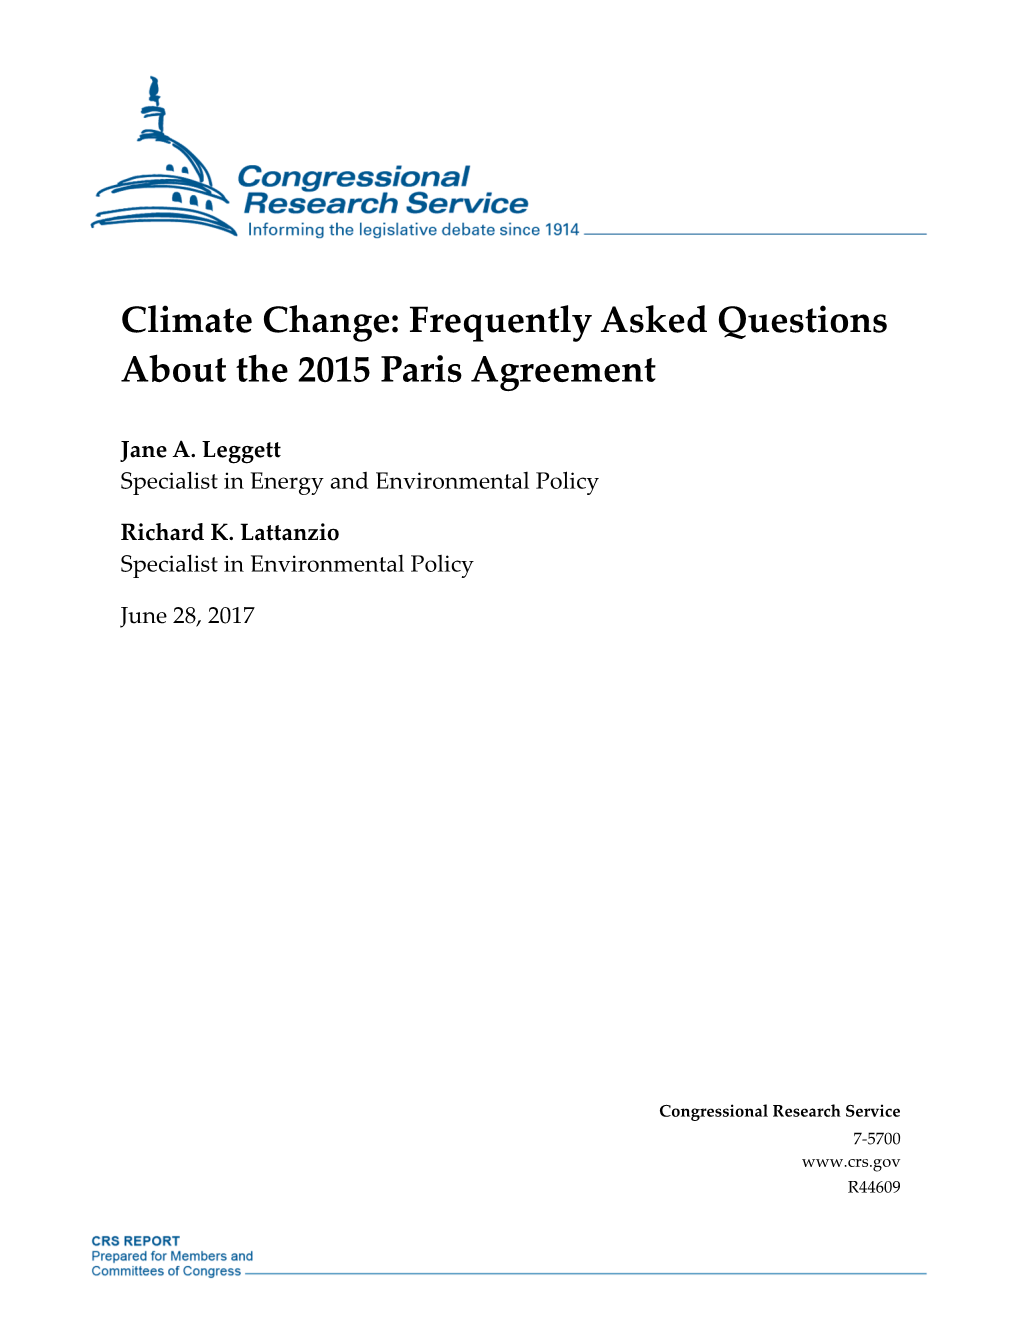 Climate Change: Frequently Asked Questions About the 2015 Paris Agreement